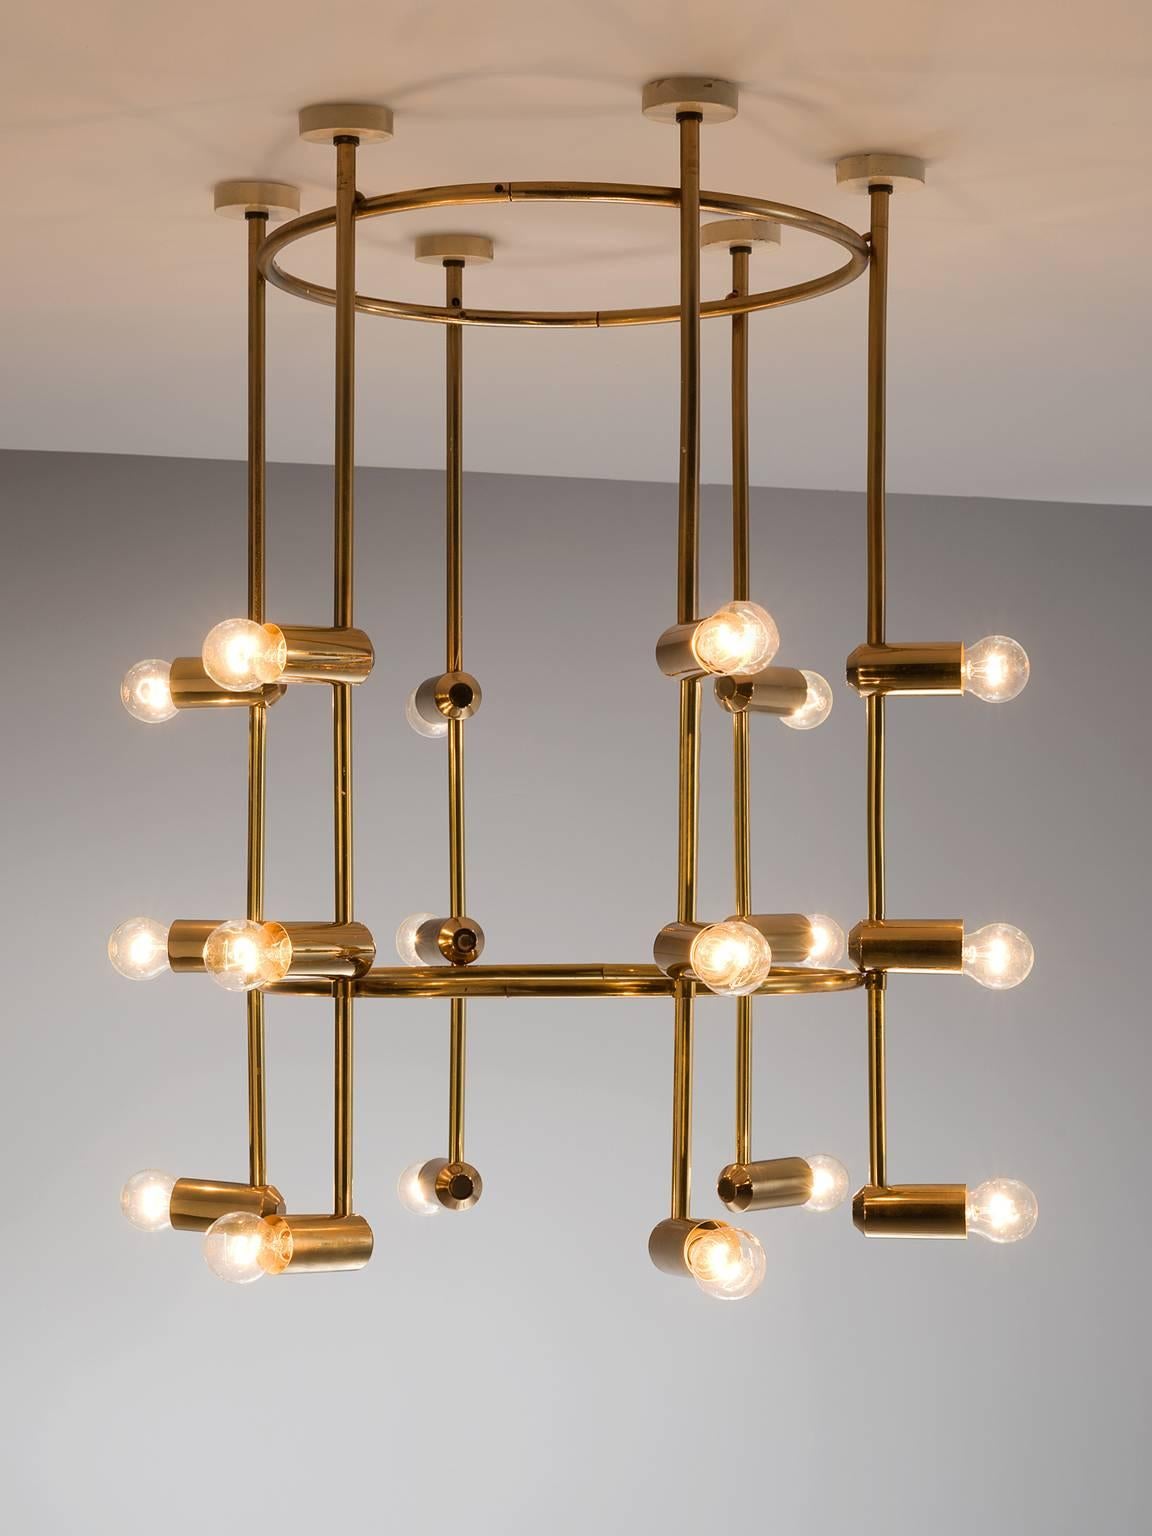 Chandelier, brass, 1960s, Switzerland.

This large yet delicate chandelier is Minimalist yet warm. The light consists of six brass stalks that are attached to a brass ring. There is a lower brass ring on the bottom giving the chandelier both